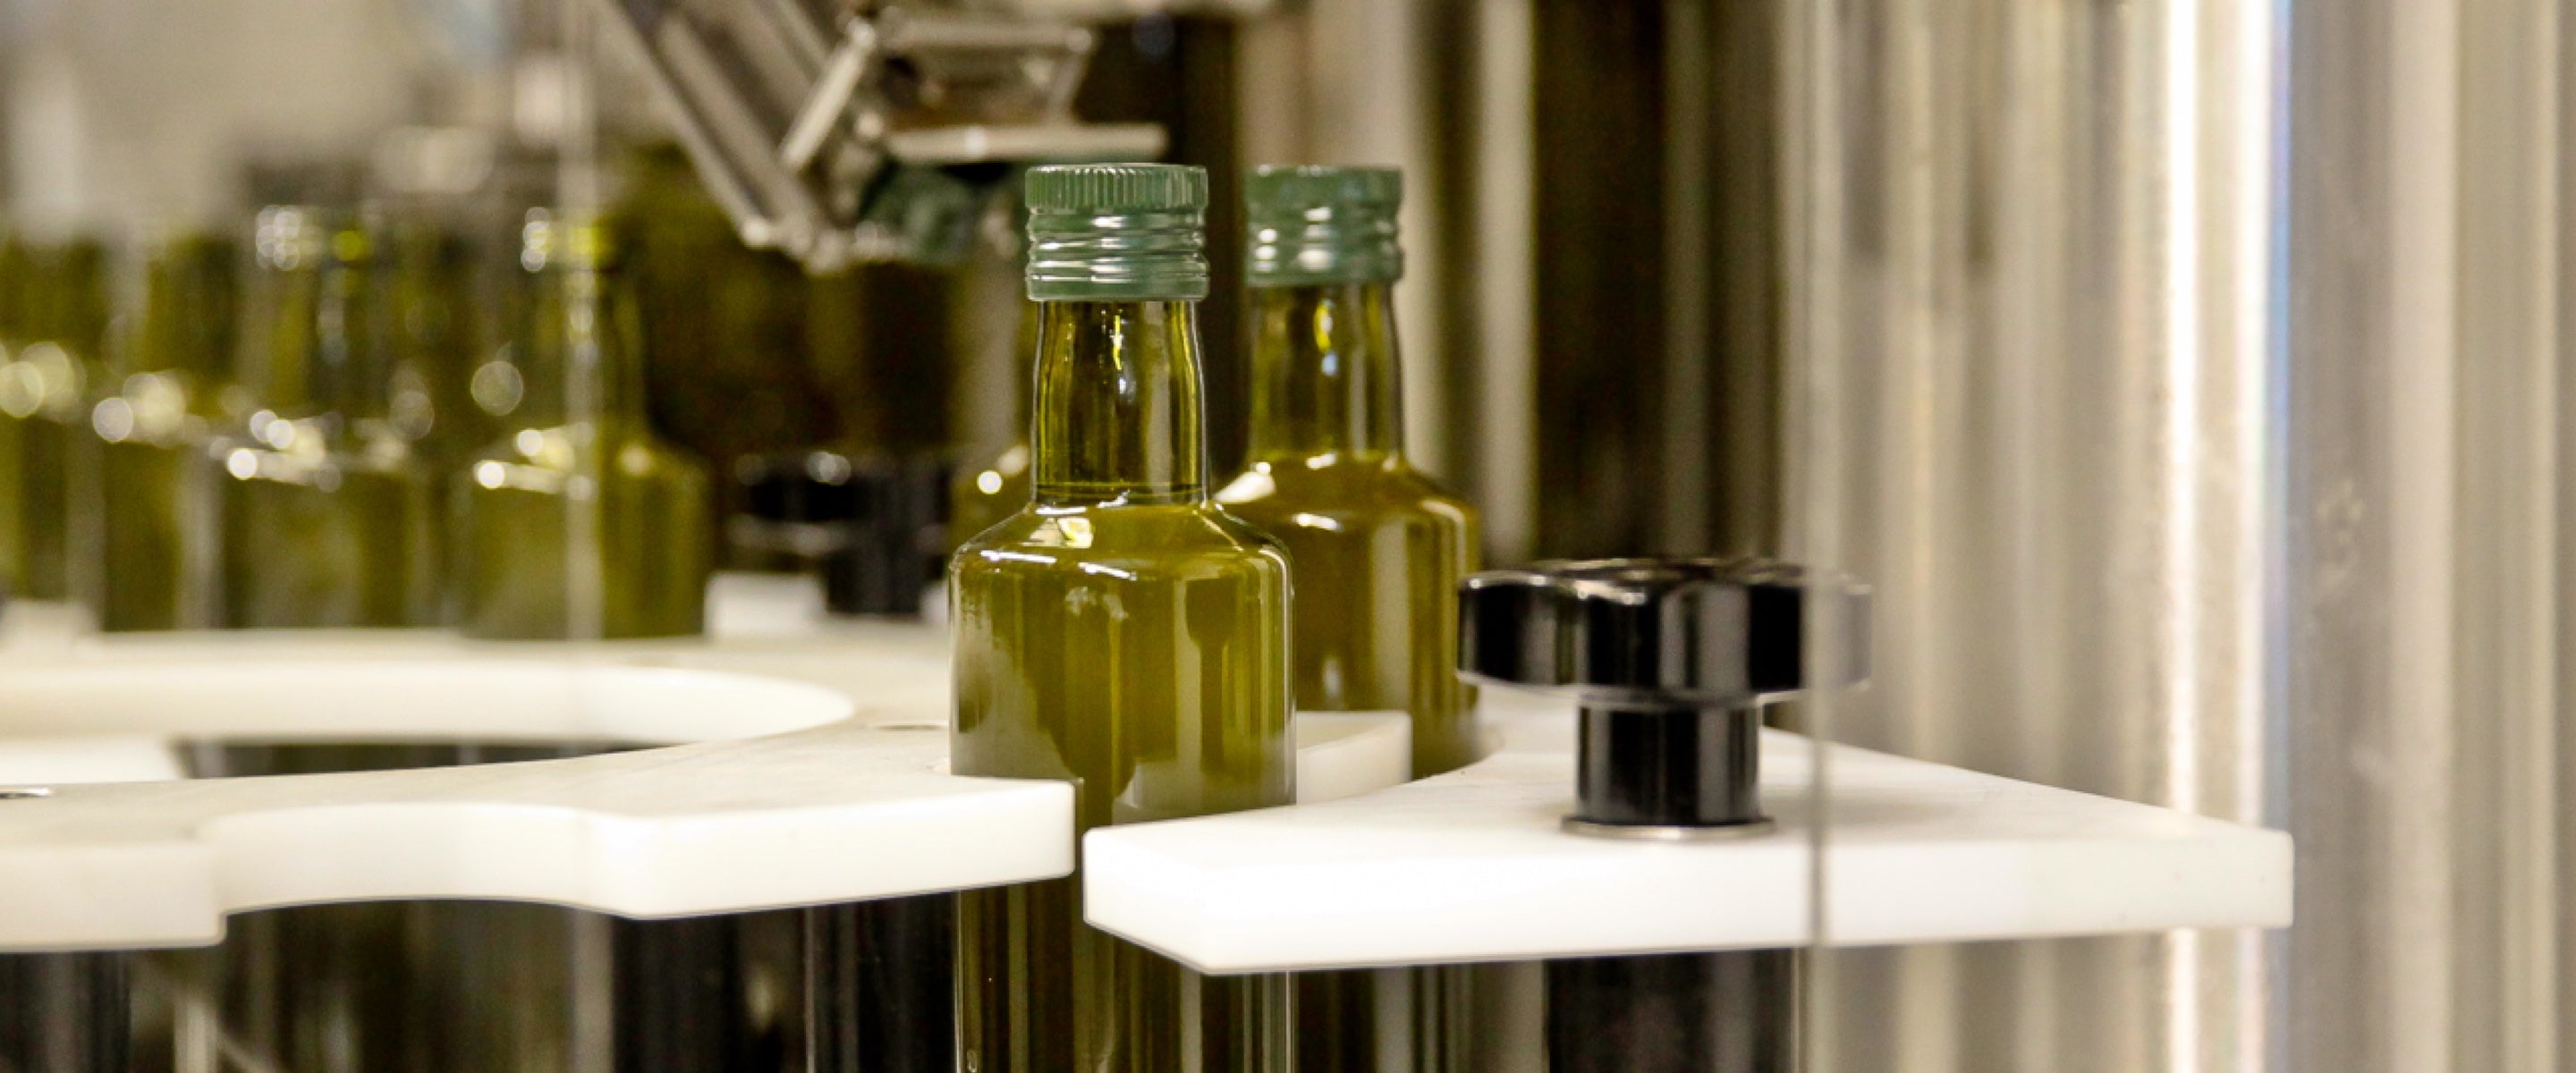 Looking for a trusted bulk olive oil supplier?